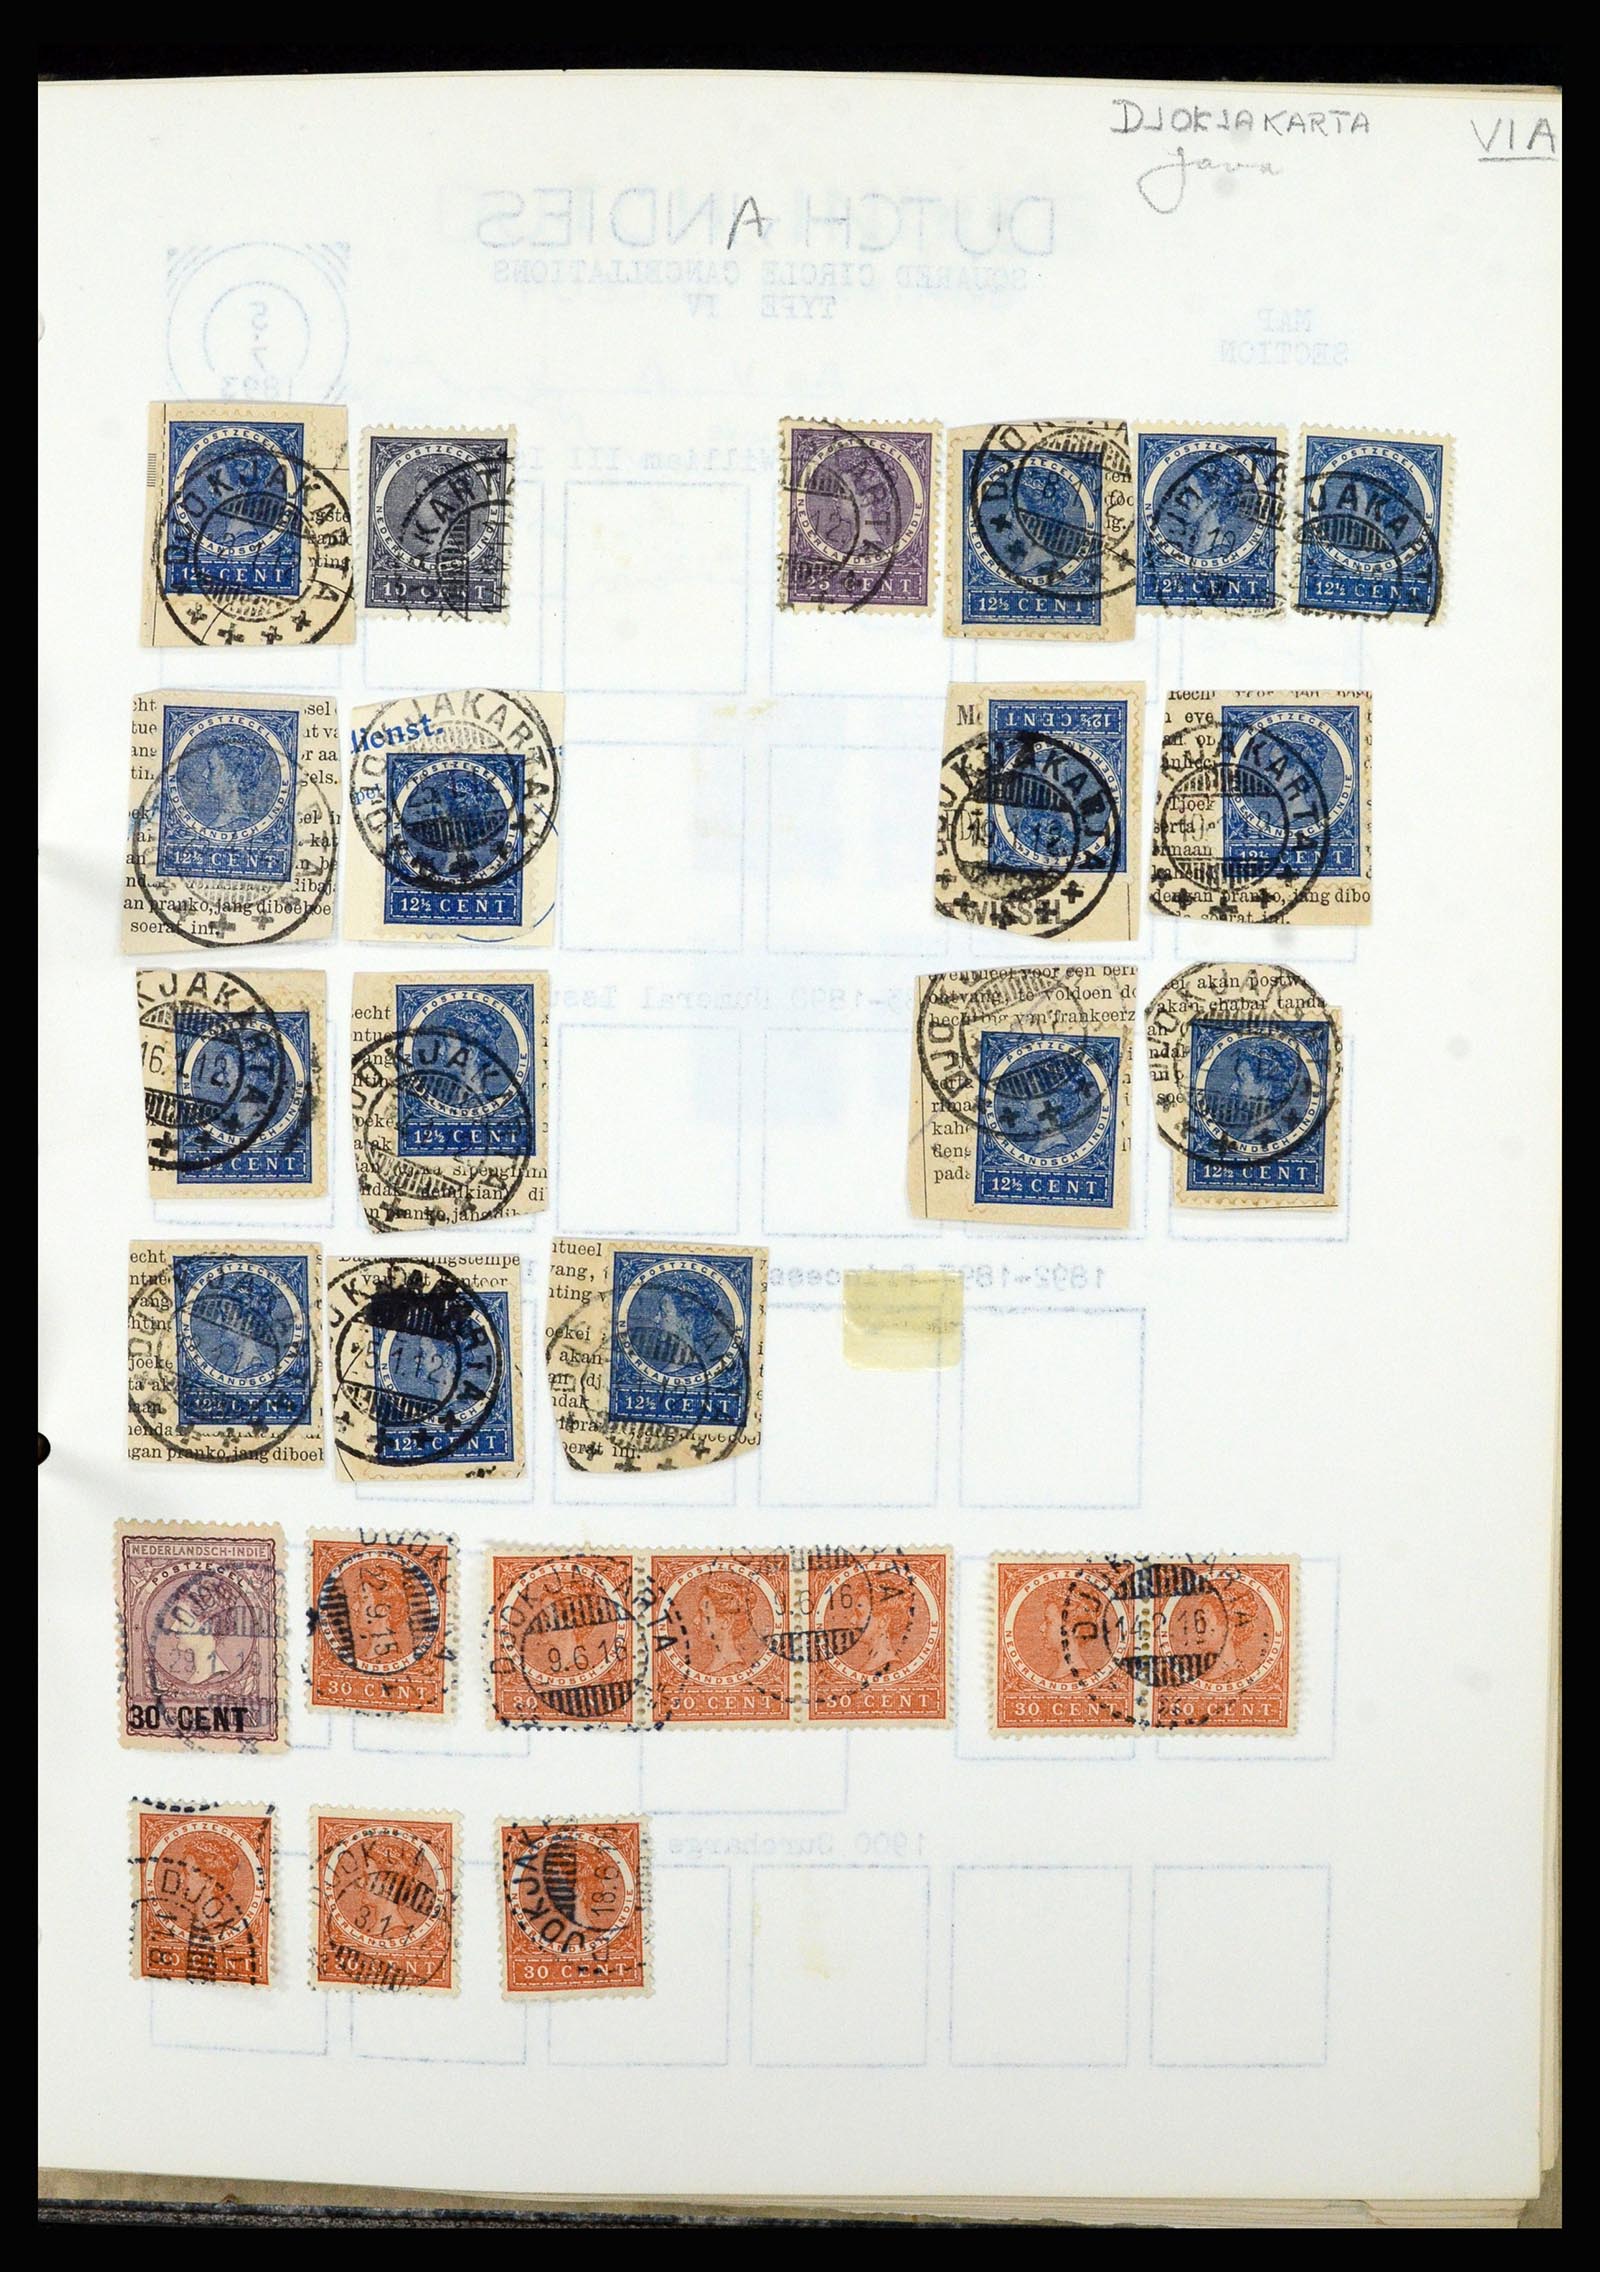 36841 035 - Stamp collection 36841 Dutch east Indies short bar cancels.